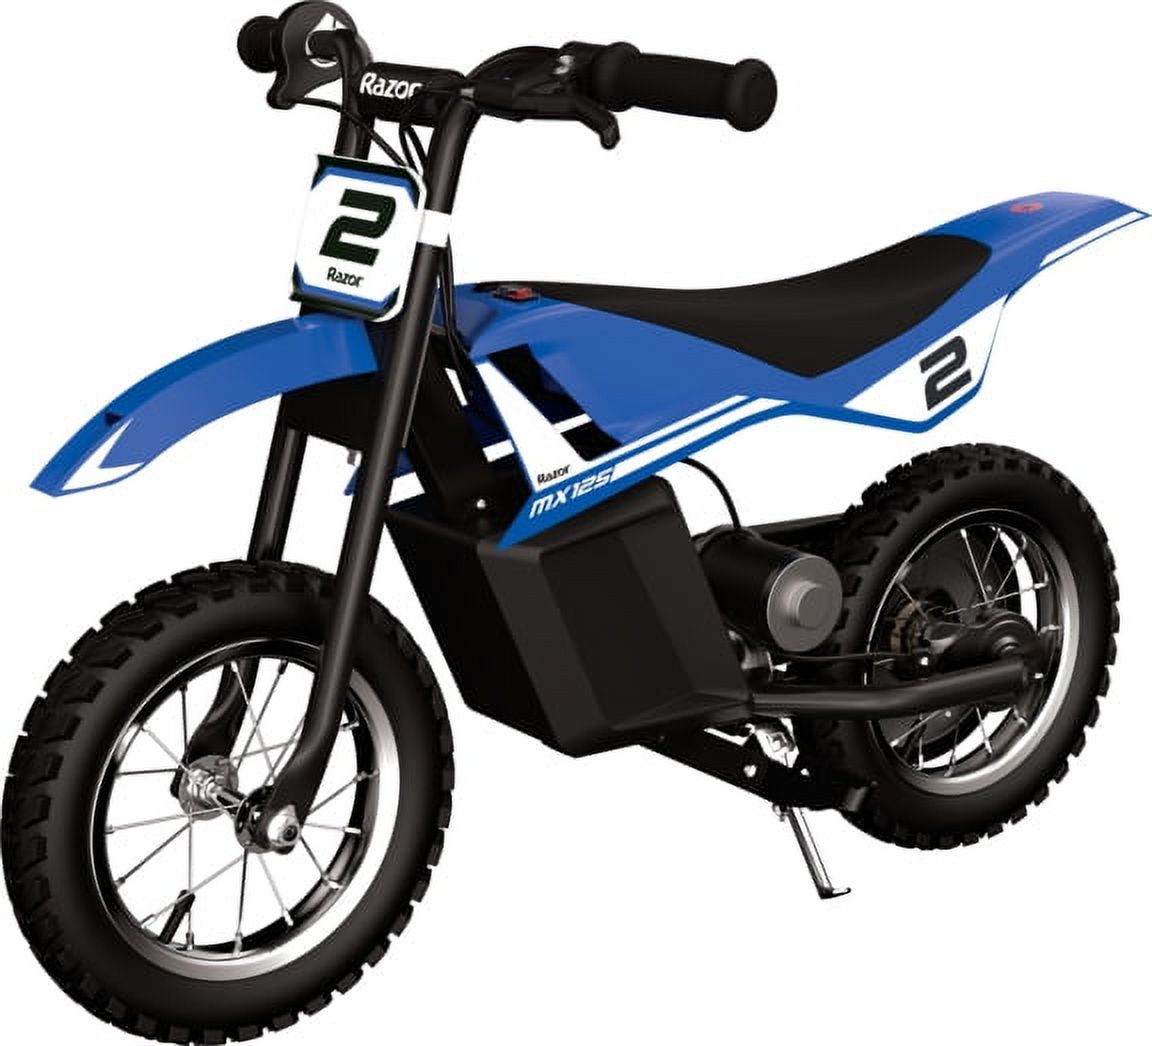 Razor Miniature Dirt Rocket MX125 Electric-Powered Dirt Bike - Recommended For Ages 7+ and Riders between 40 and 80 lbs - image 1 of 10